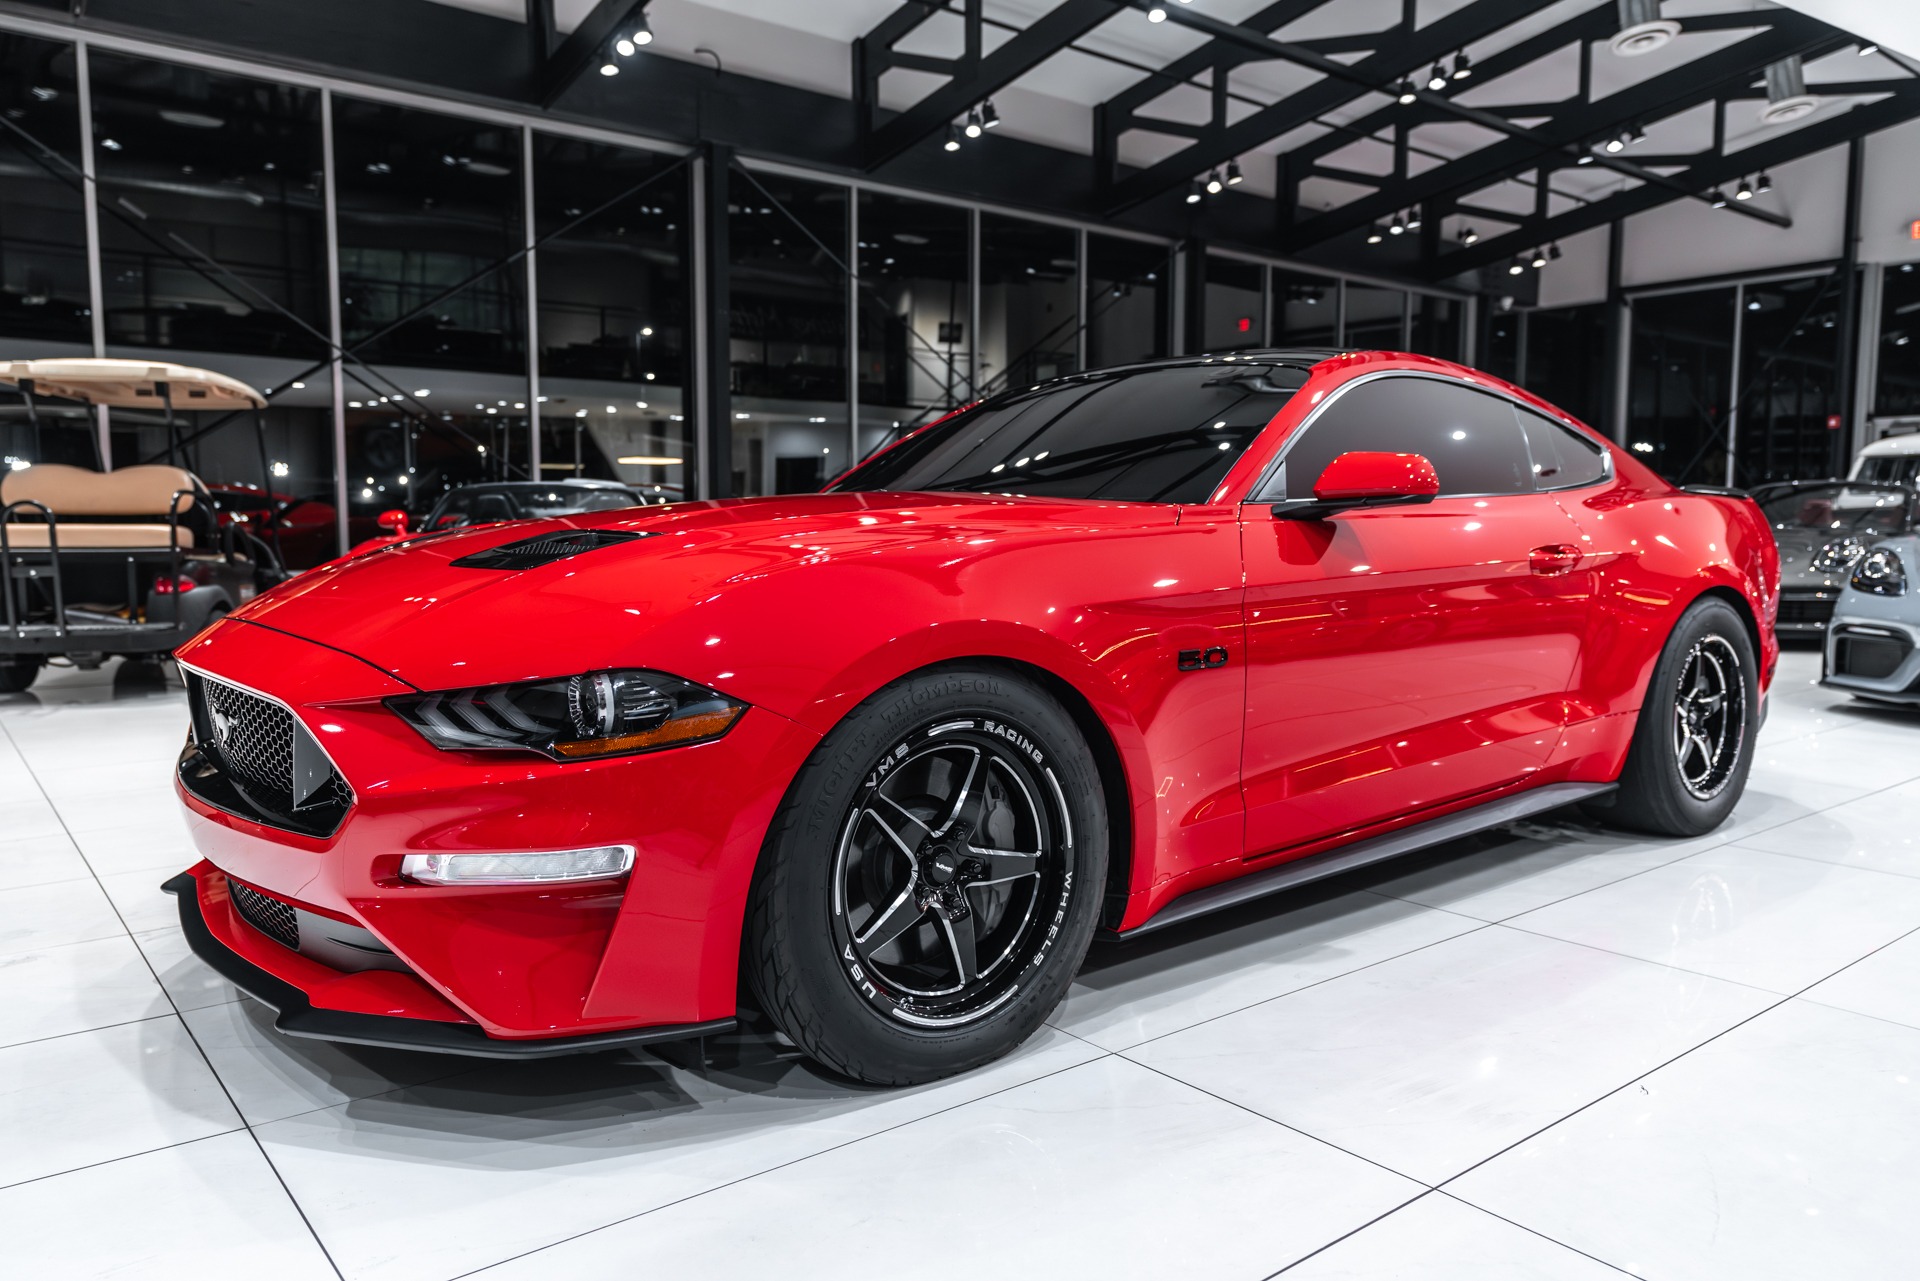 Used-2018-Ford-Mustang-GT-Coupe-Twin-Turbo-L-M-Racing-Engine-6466-Turbos-ONLY-6k-Miles-10-Spd